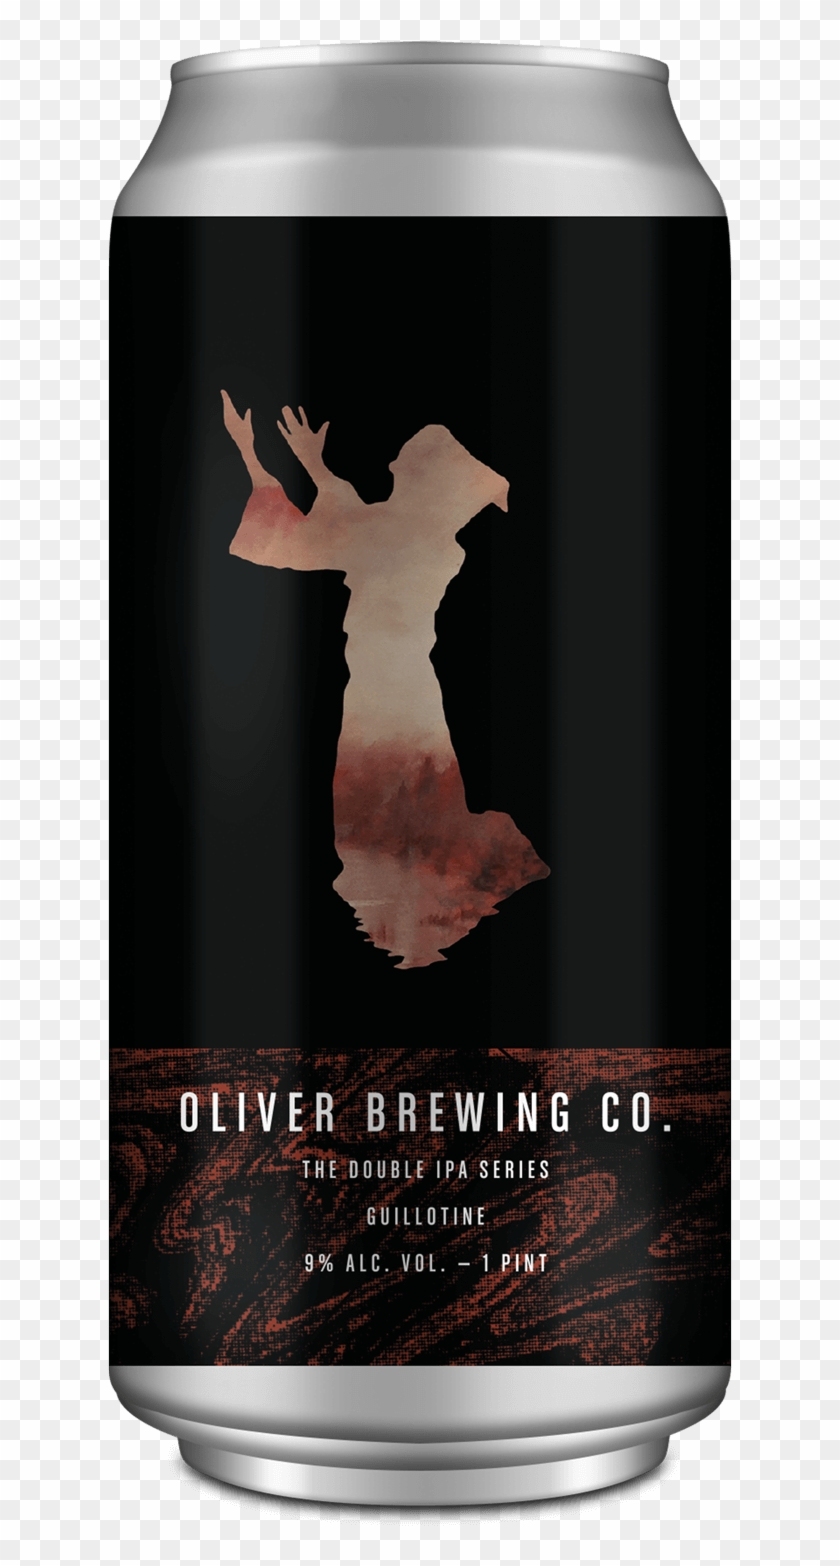 Oliver Brewing Co - Poster Clipart #4723928